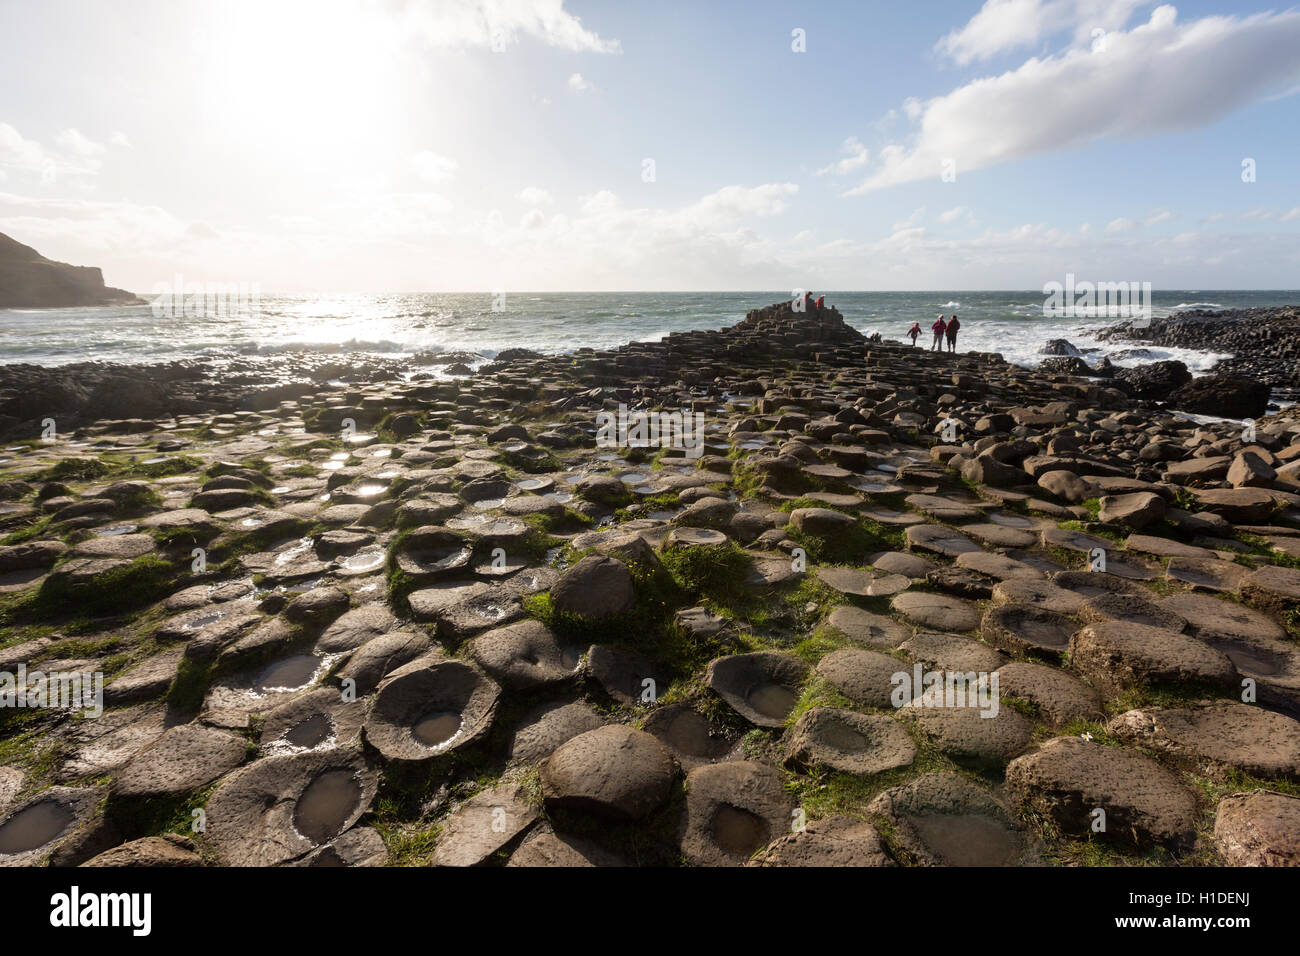 Tourists in Giant's Causeway at sunset, Bushmills, County Antrim, Northern Ireland, UK Stock Photo